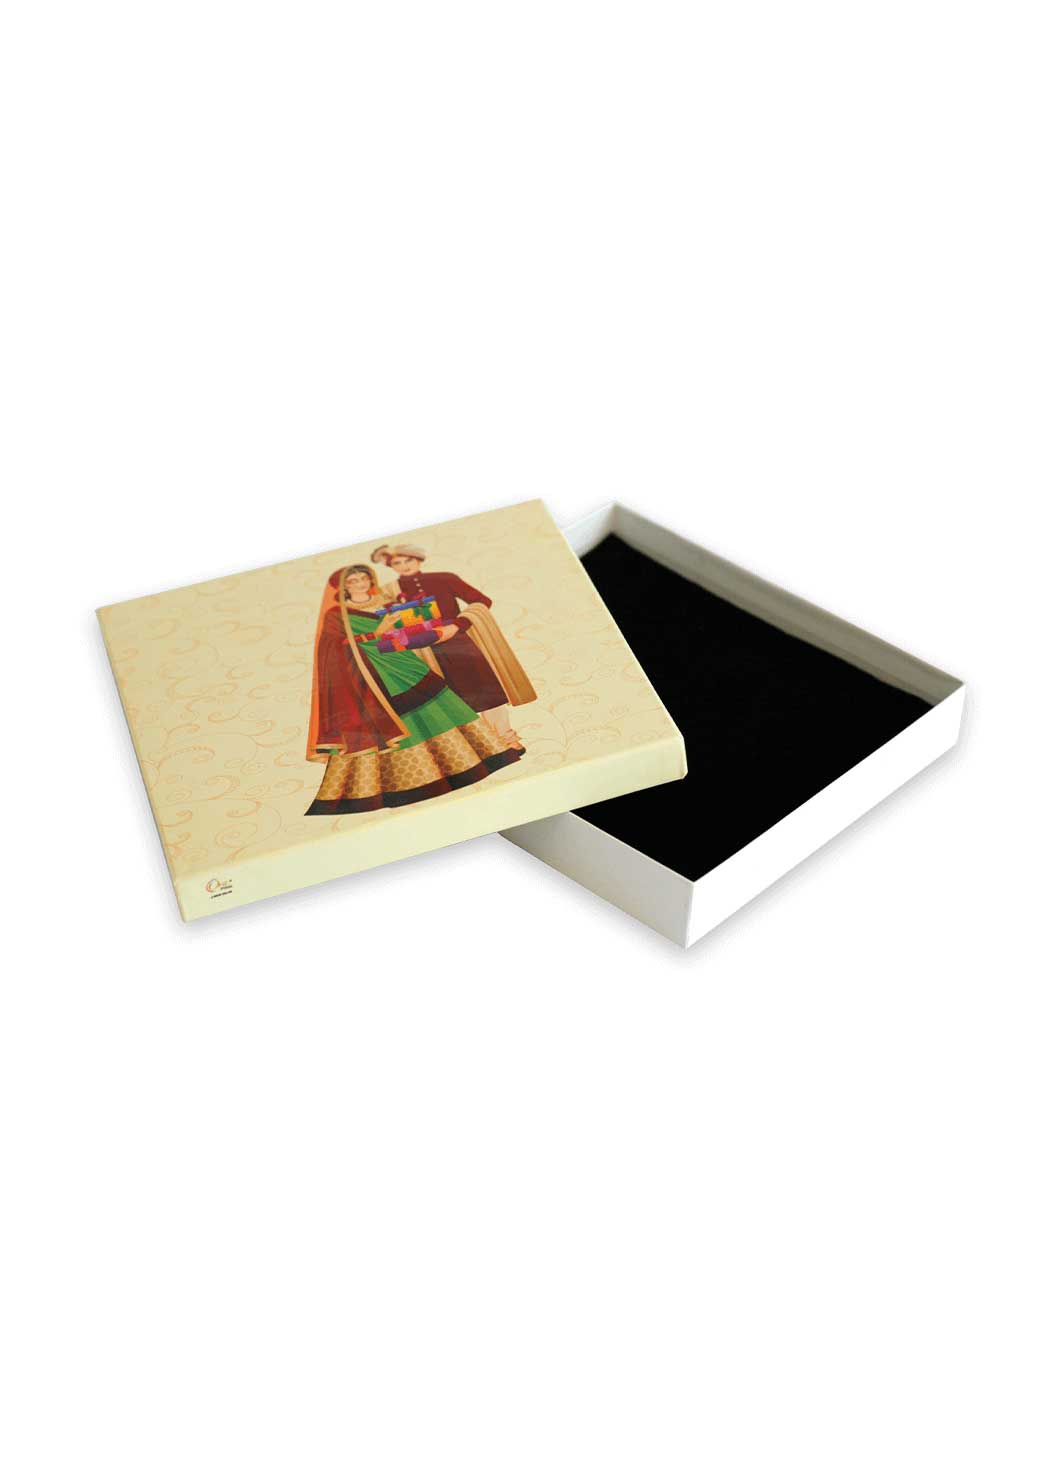 Him and Her - Wedding Photography Box- Cloth packaging box